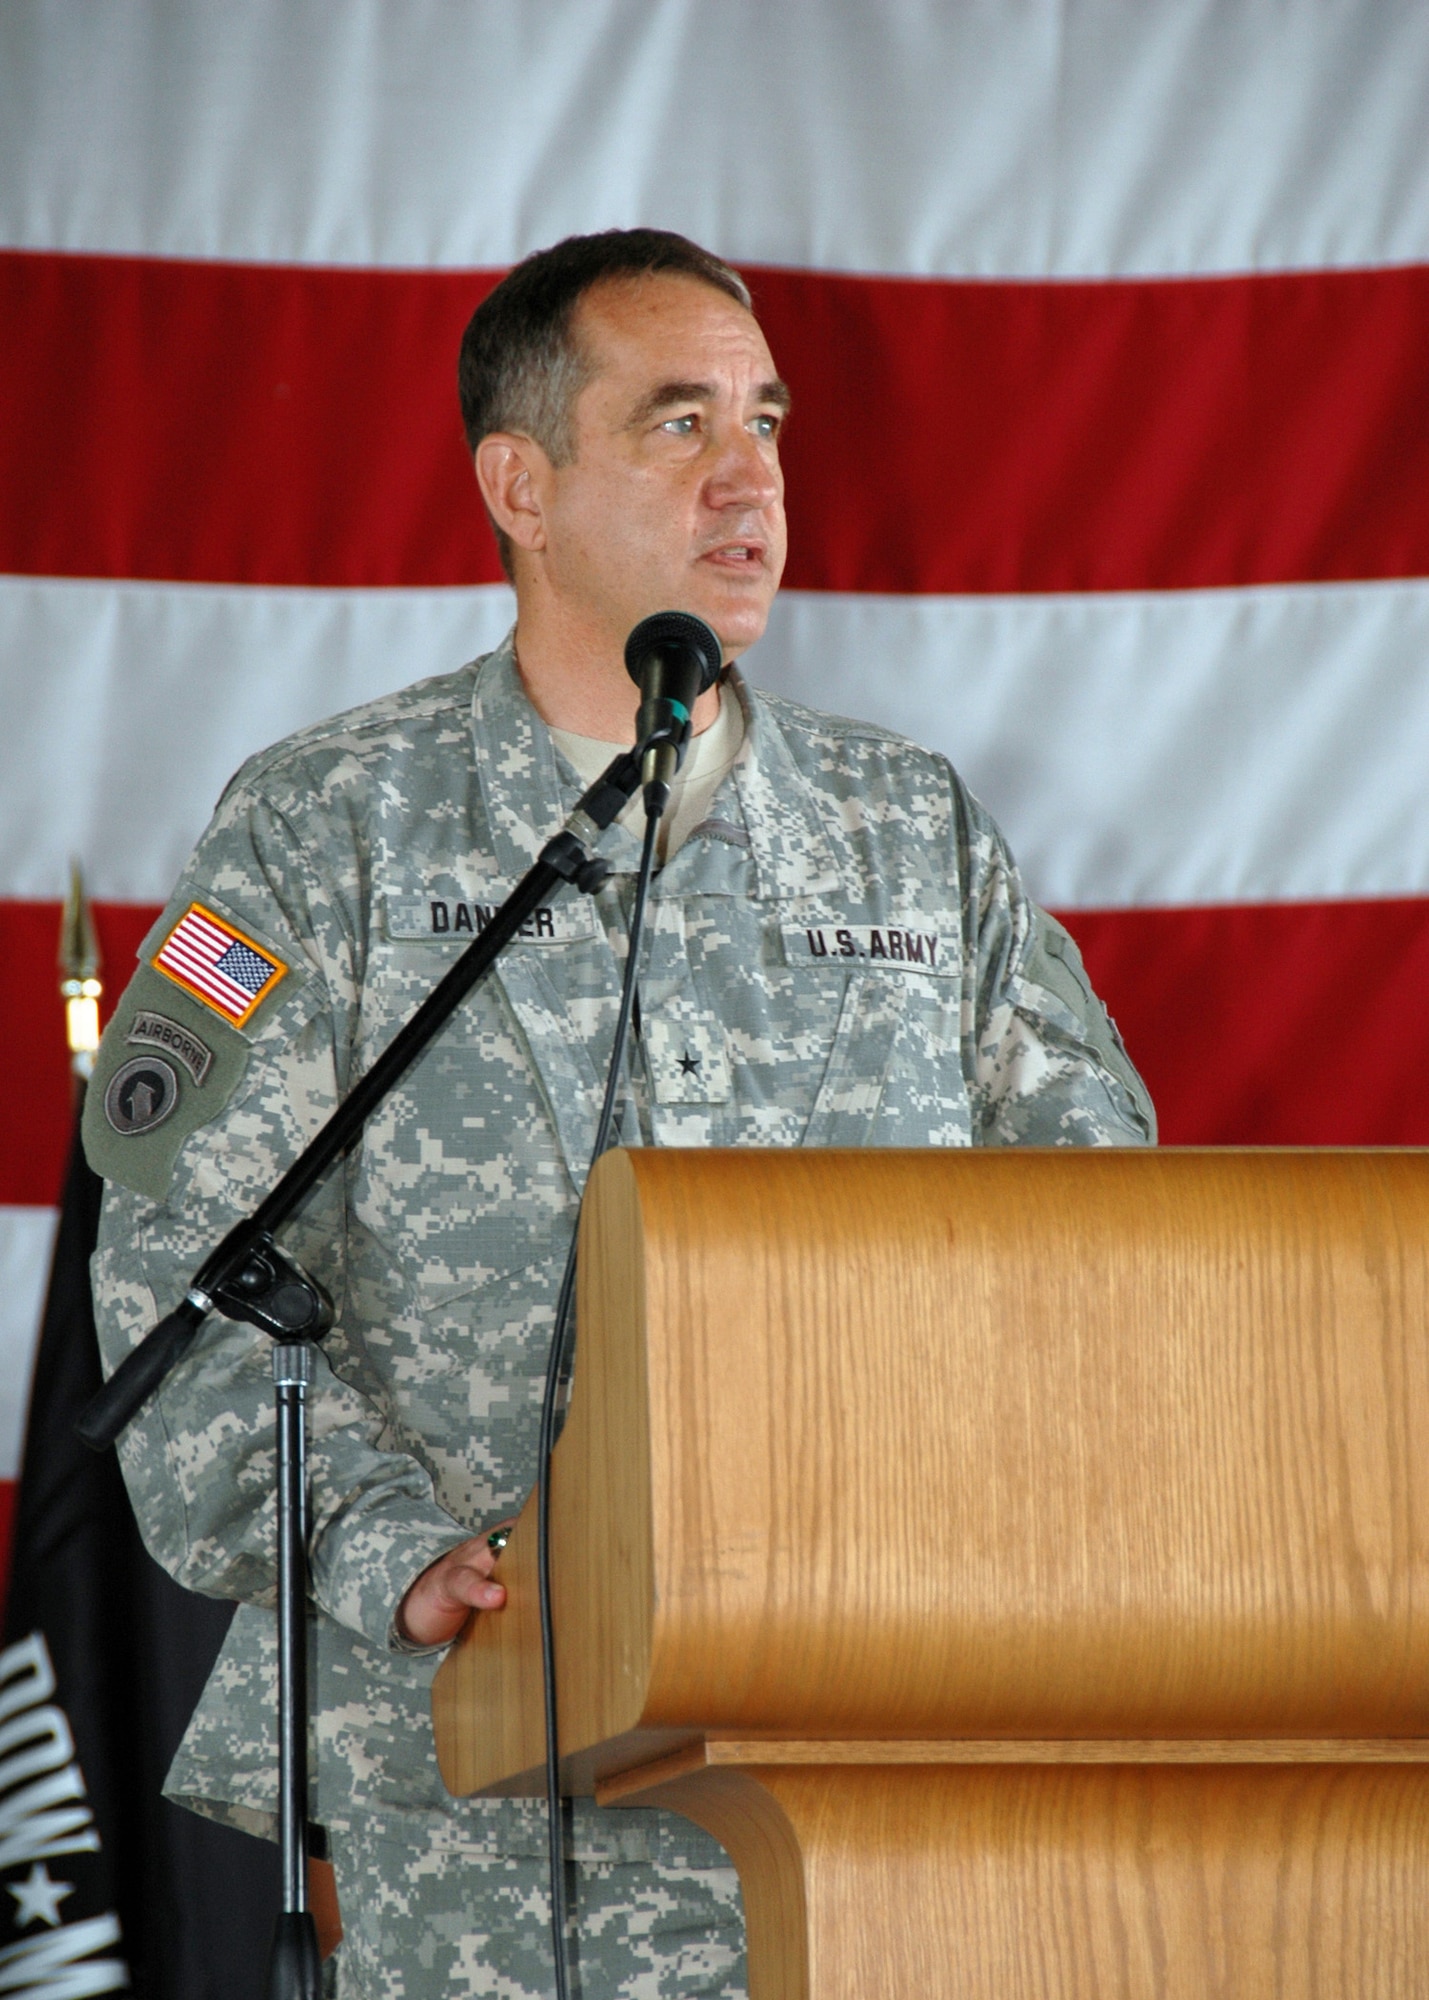 END OF AN ERA.  Brig. General Stephen Danner, Adjutant General State of Missouri, spoke at the 131st Fighter Wing End of Era Ceremony, at the Missouri Air National Guard Base-Lambert Field, June 13, 2009.  "The spirit of the 131st is not reprsented by the iron, but by those who are here--past and present," said Danner.  The ceremony commemorated the culmination of 86 years of flying operations in Saint Louis.  (U.S. Air Force Photo by Senior Airman Amber Hodges.  RELEASED)